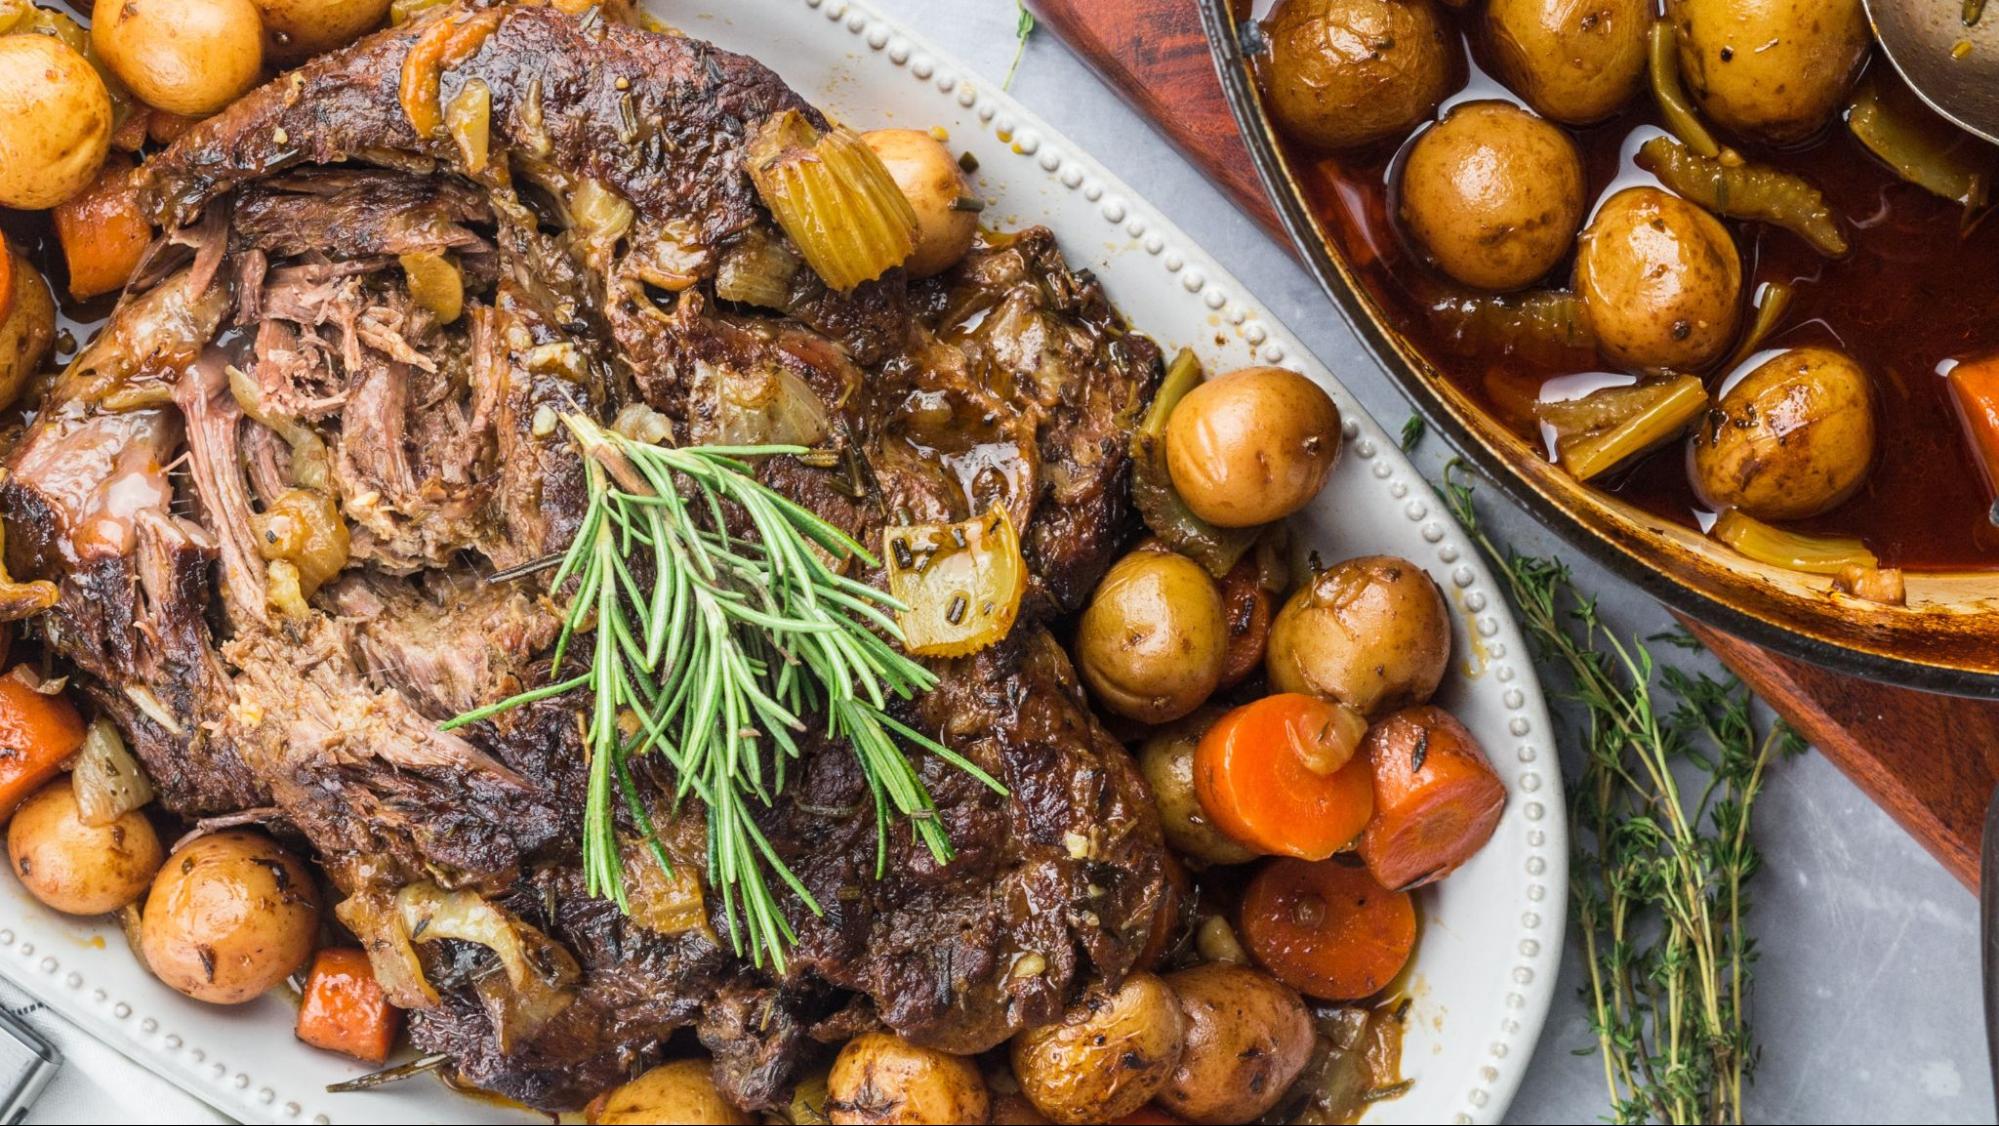 Slow cooked roast with potatoes, carrots, and rosemary, perfect with V. Sattui 2019 Napa Valley Cabernet Sauvignon